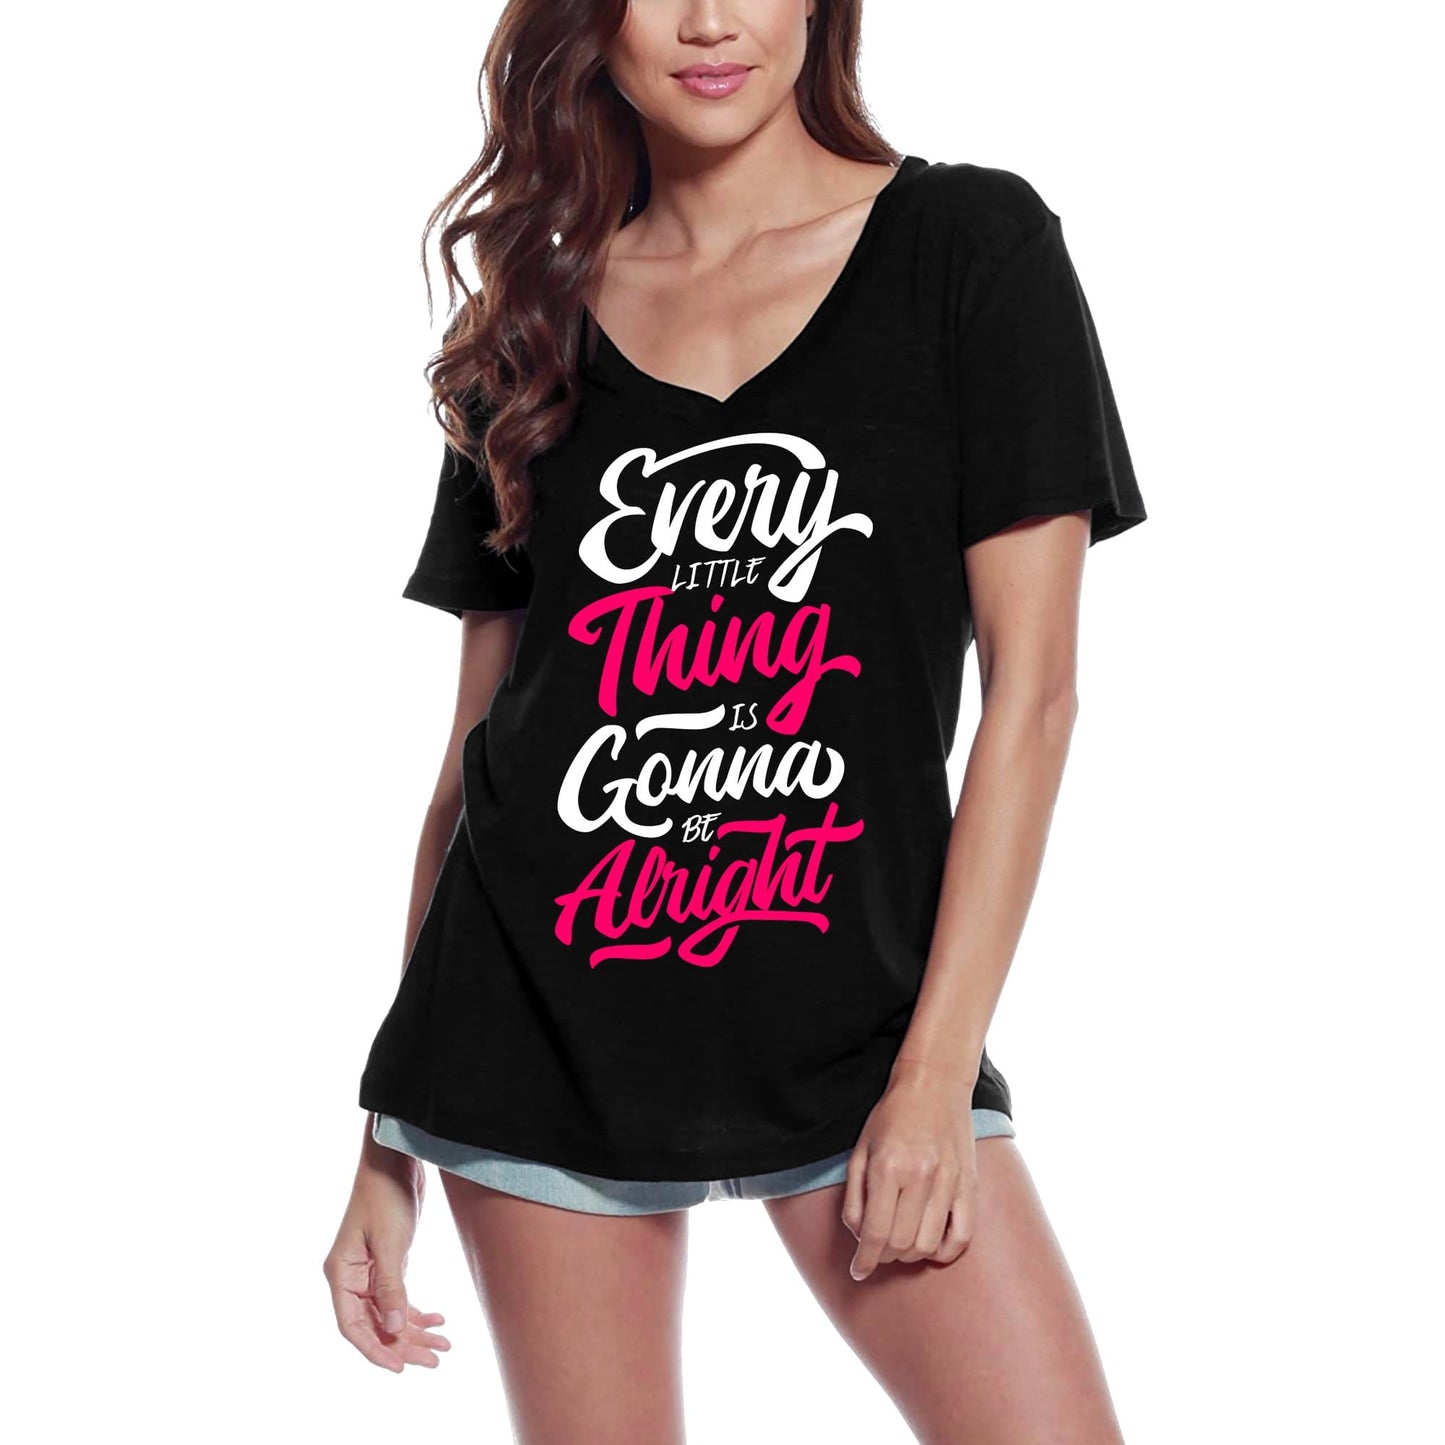 ULTRABASIC Women's T-Shirt Every Little Thing Gonna Be Alright - Slogan Tee